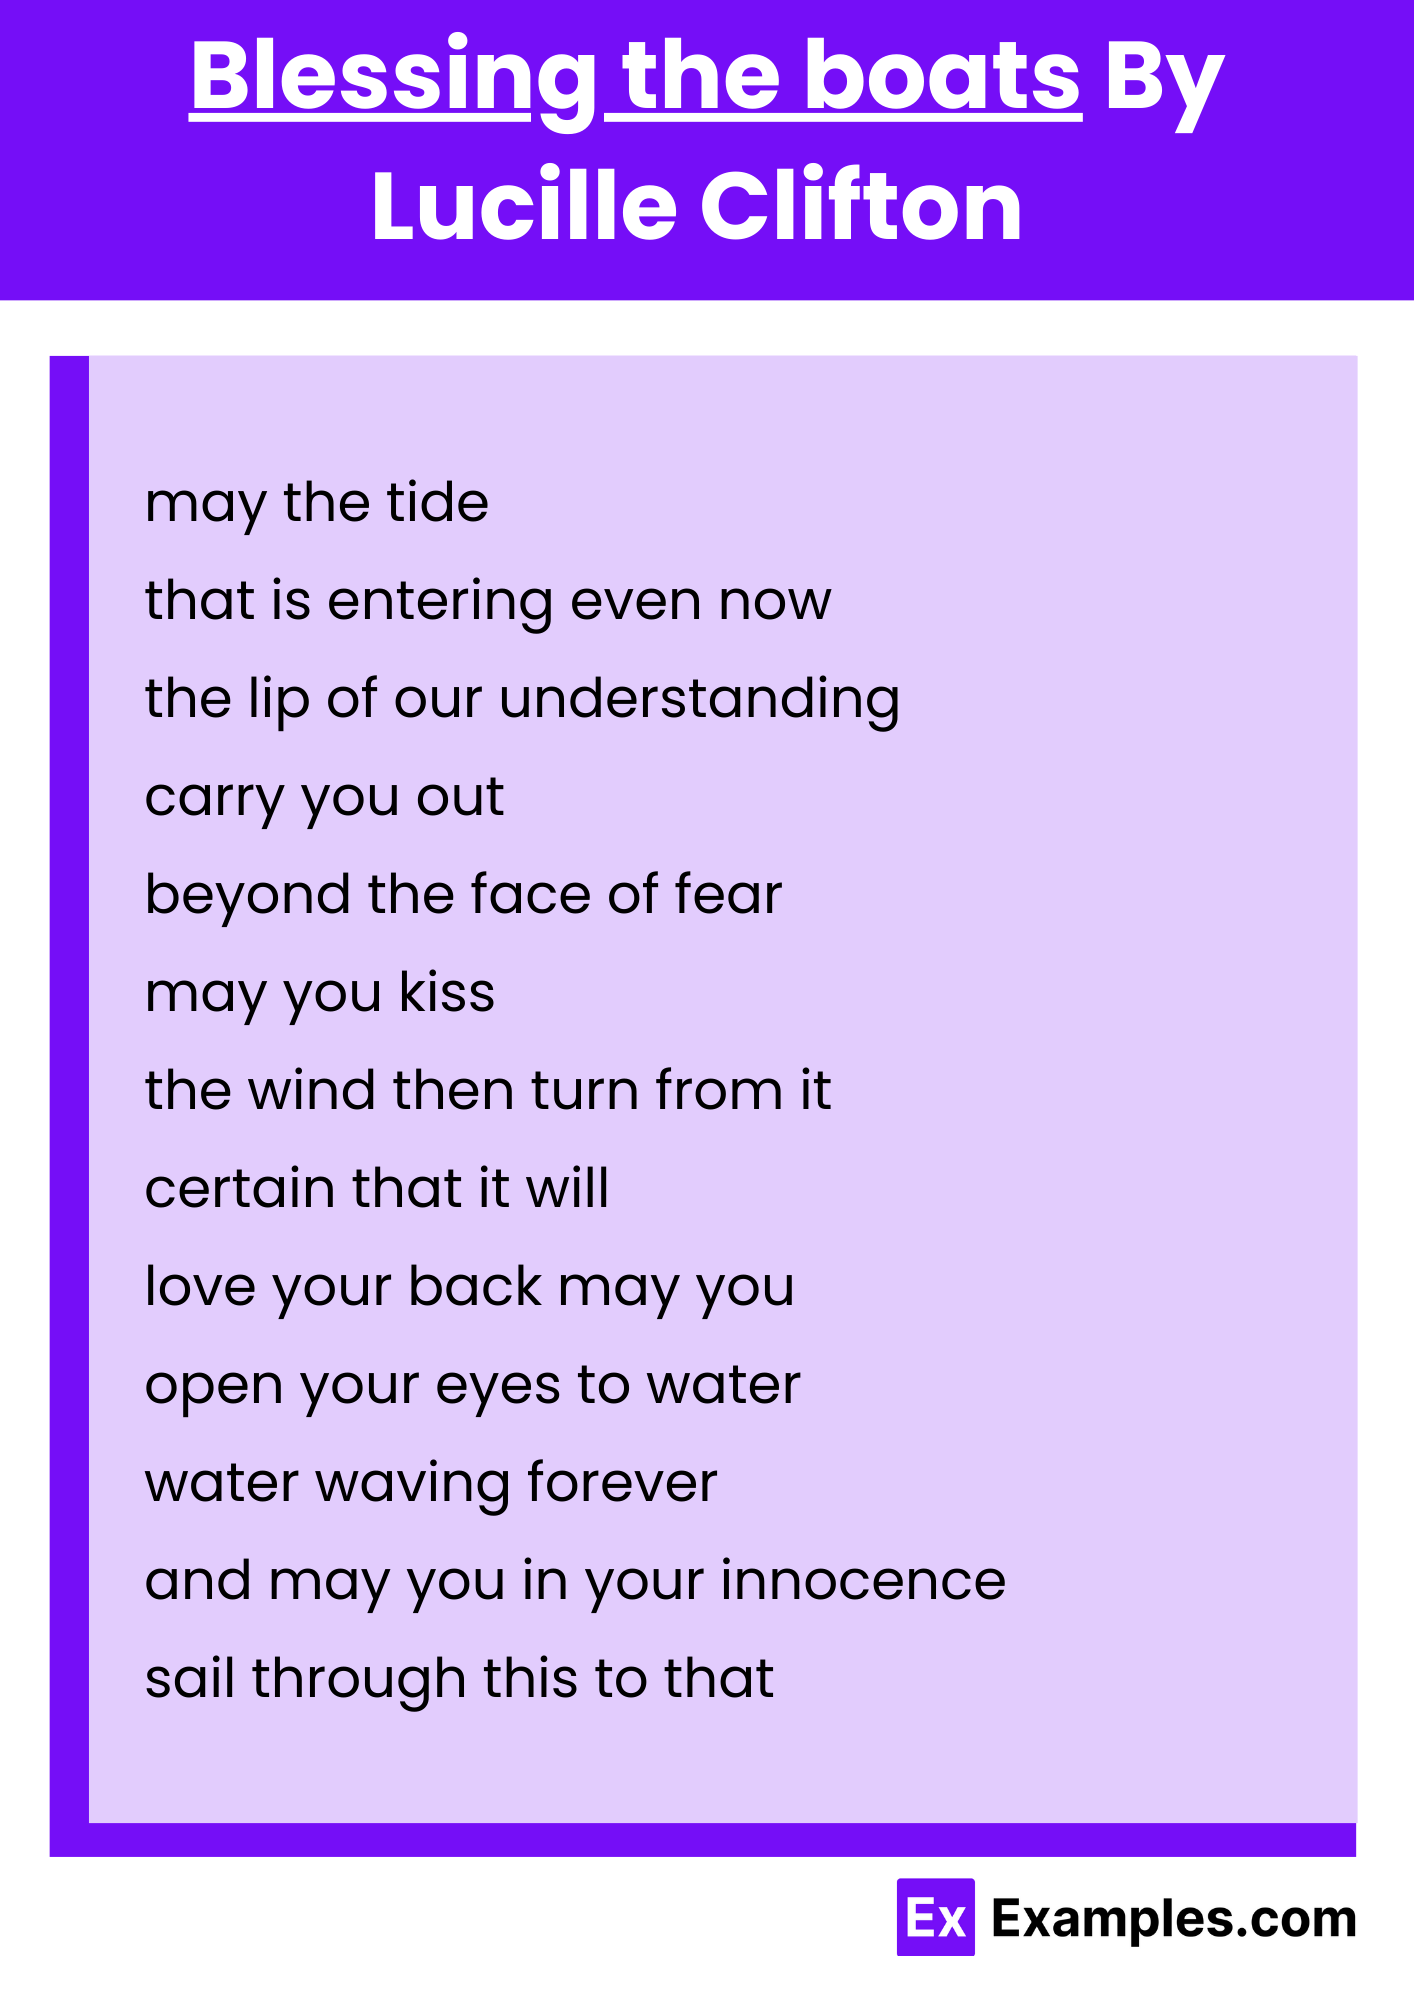 Blessing the boats By Lucille Clifton